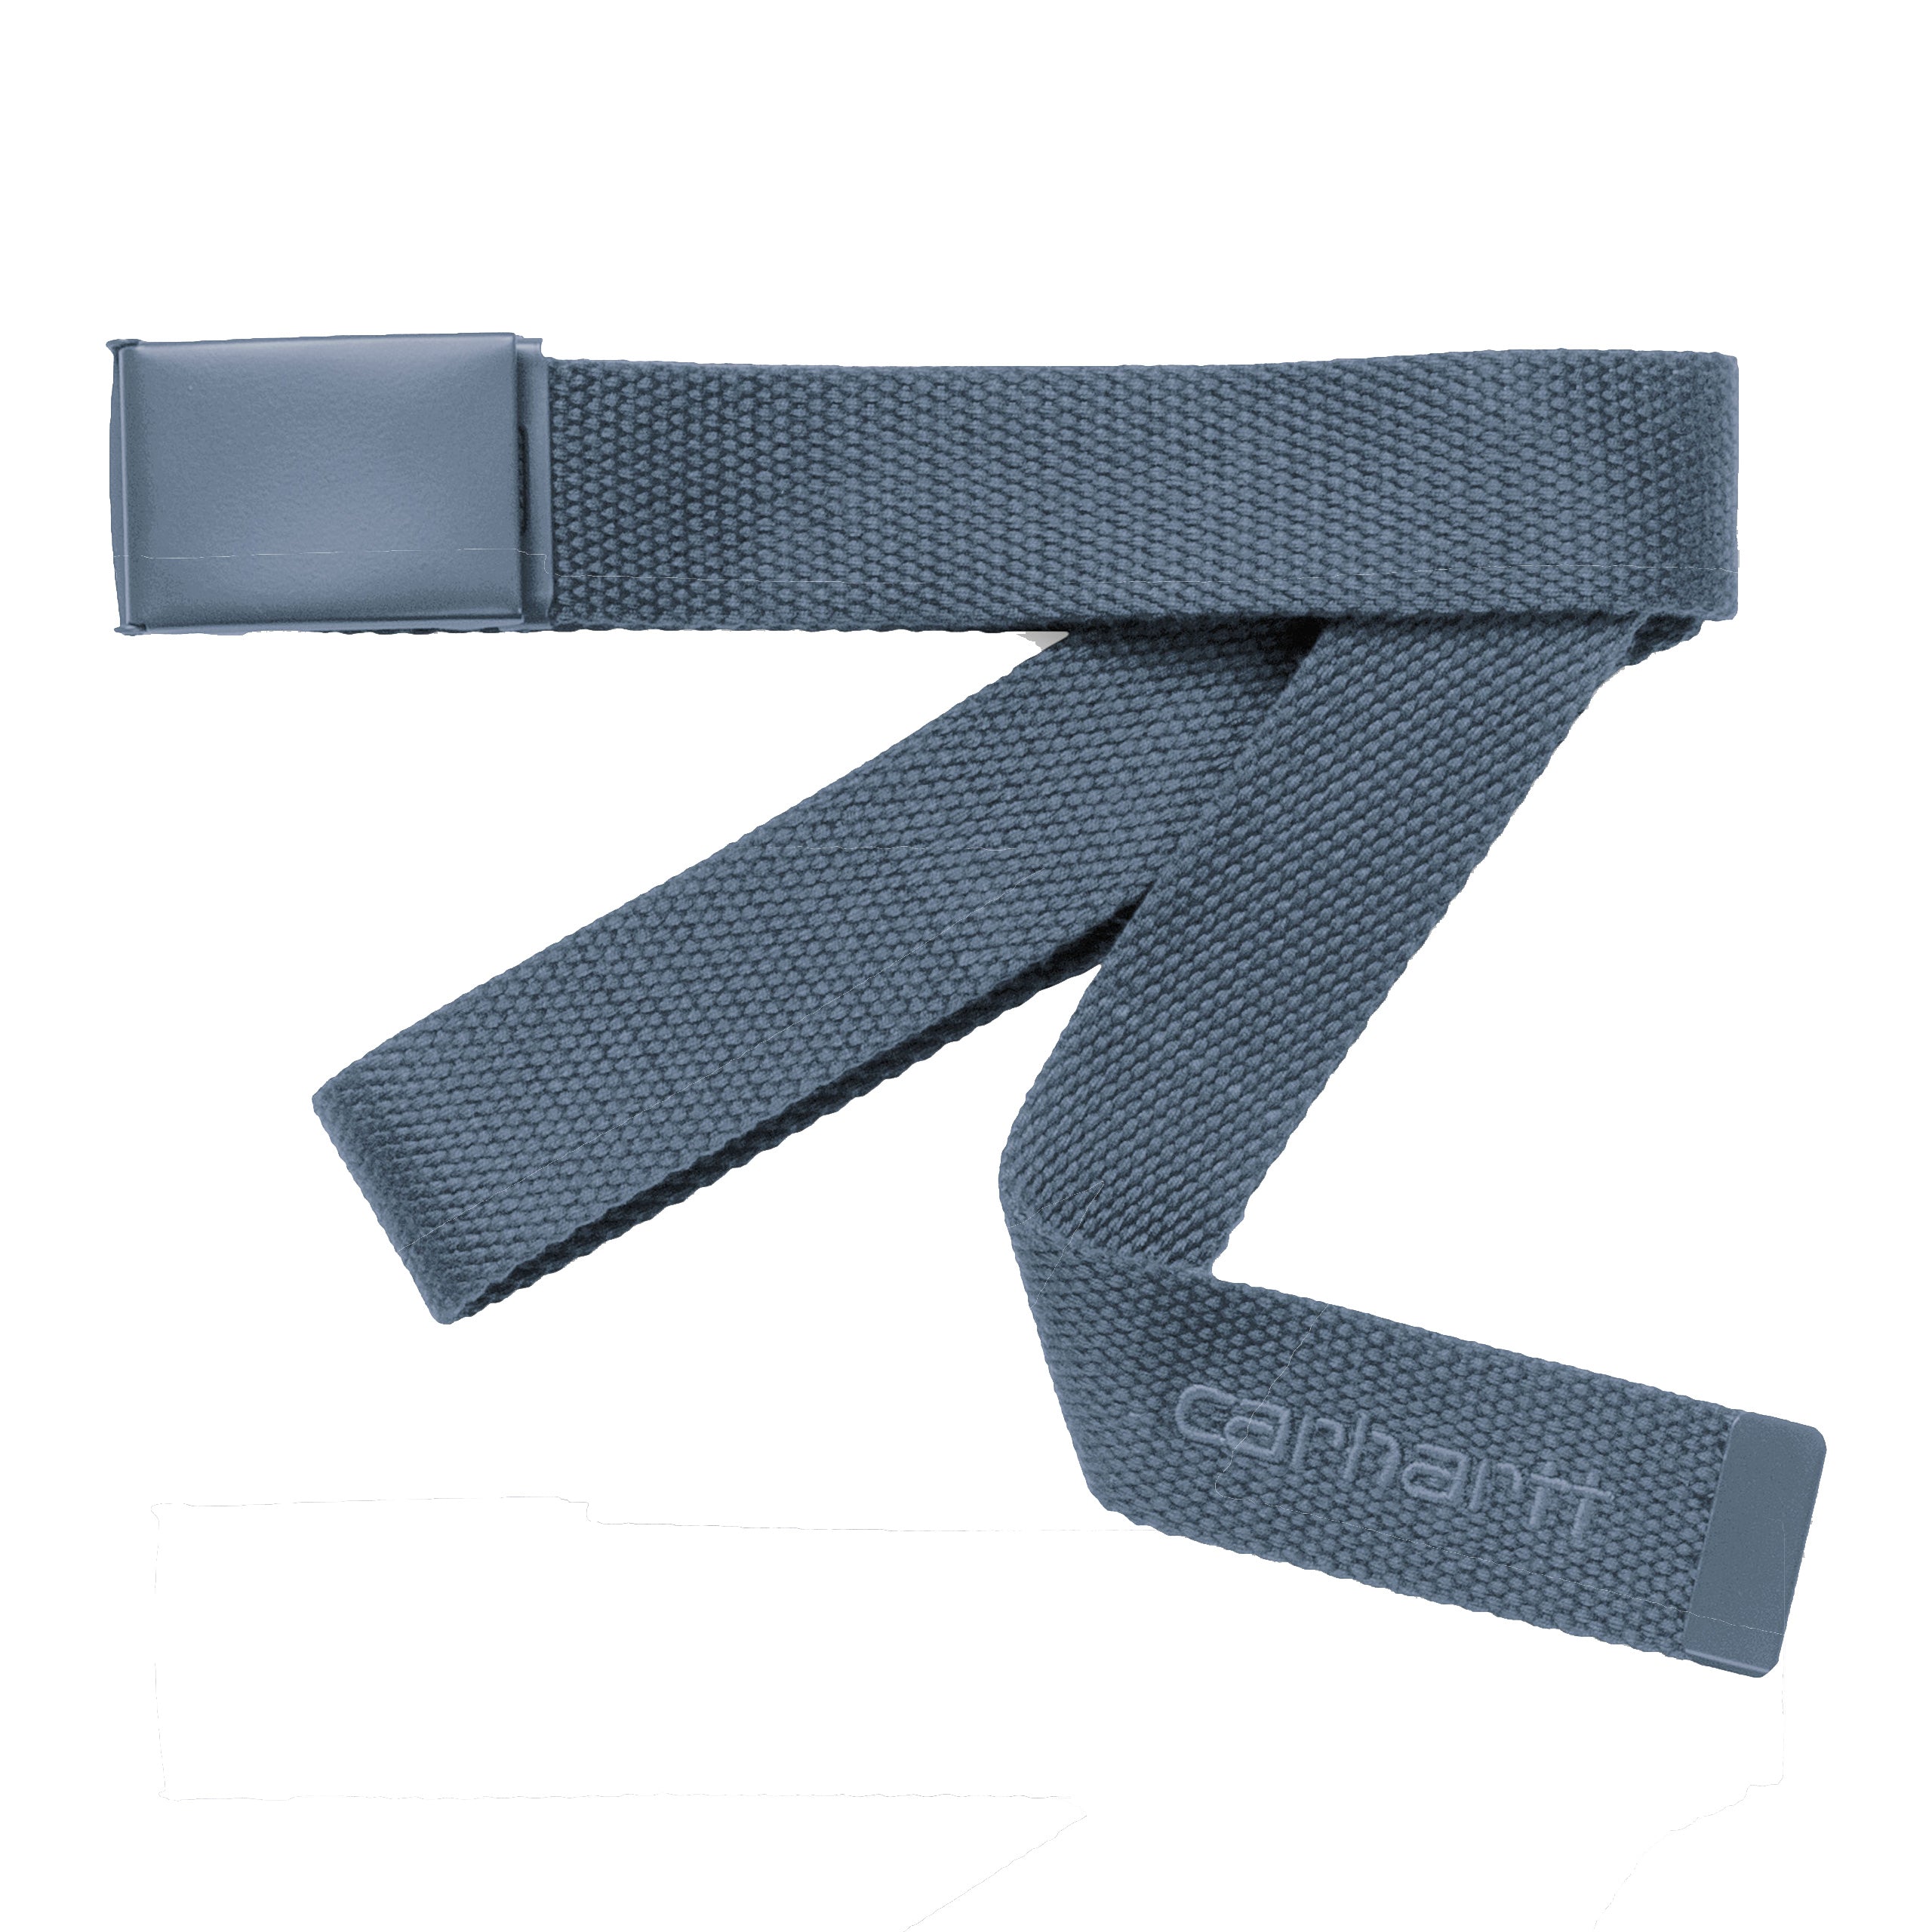 Canvas webbing belt from Carhartt WIP in a blue grey colour with metal buckle and embroidered logo on belt. One size fits all. Pay for your order with Klarna or Paypal. 